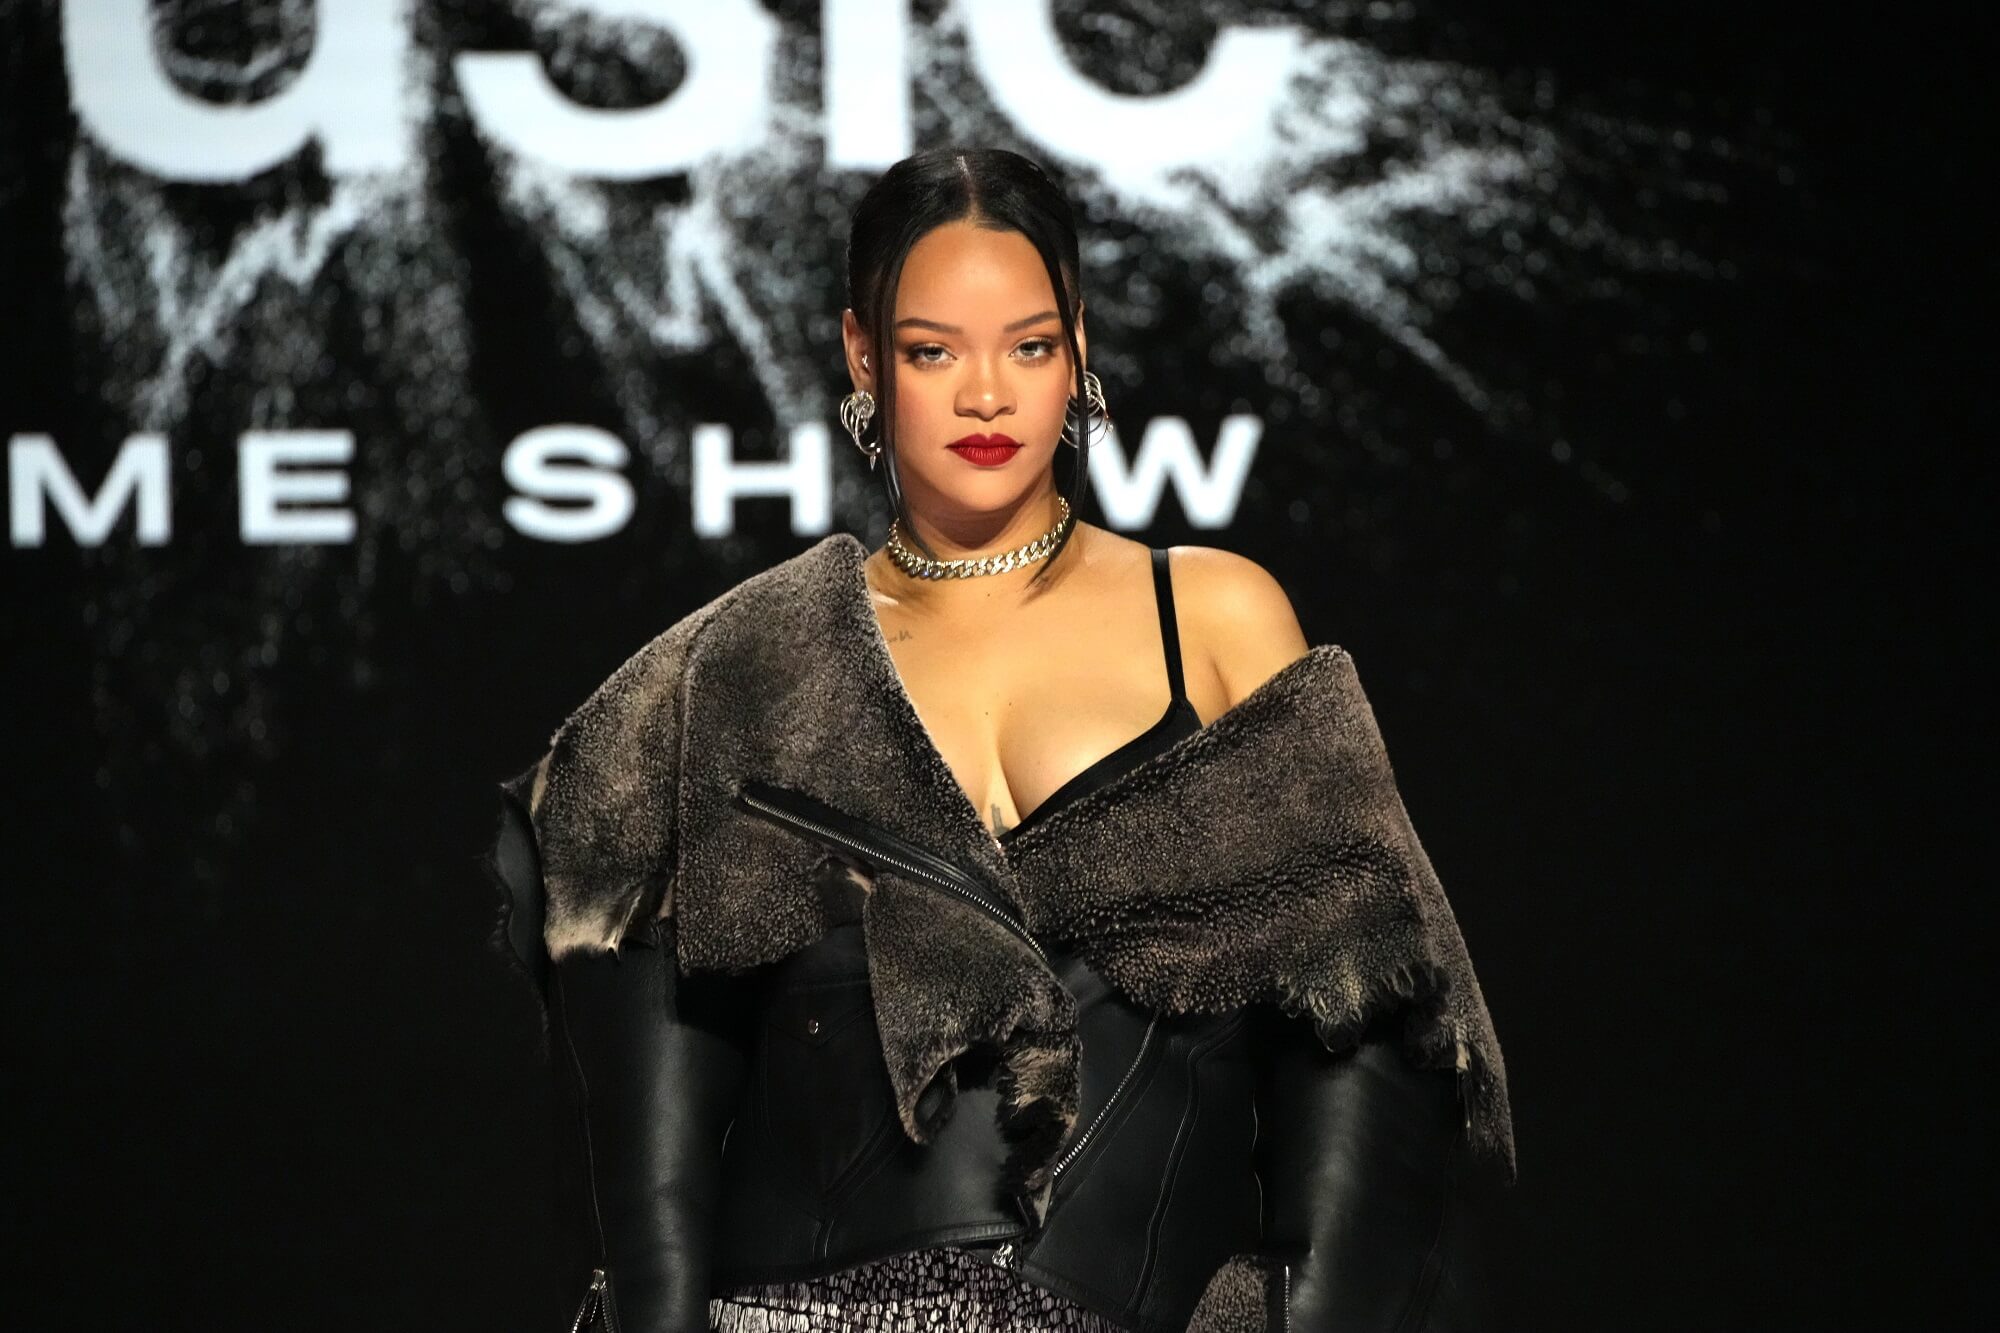 Rihanna looks into the camera while wearing a black outfit